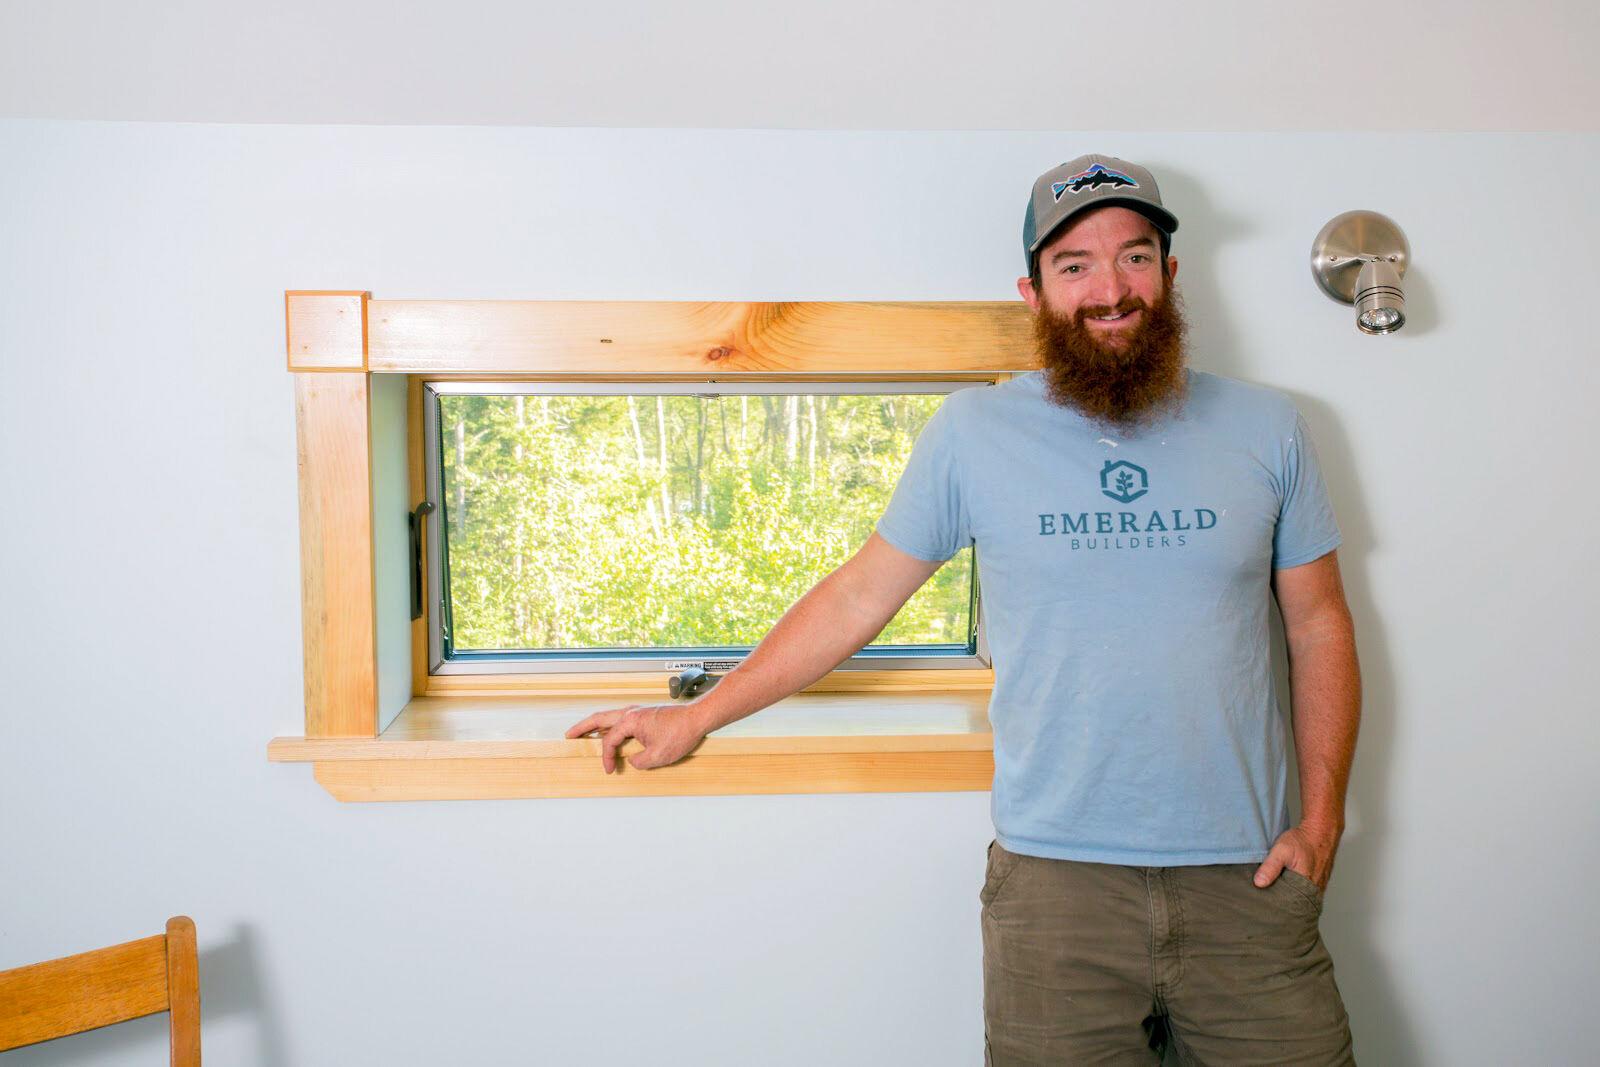 Emerald Builders Create Net-Zero Homes for One and All